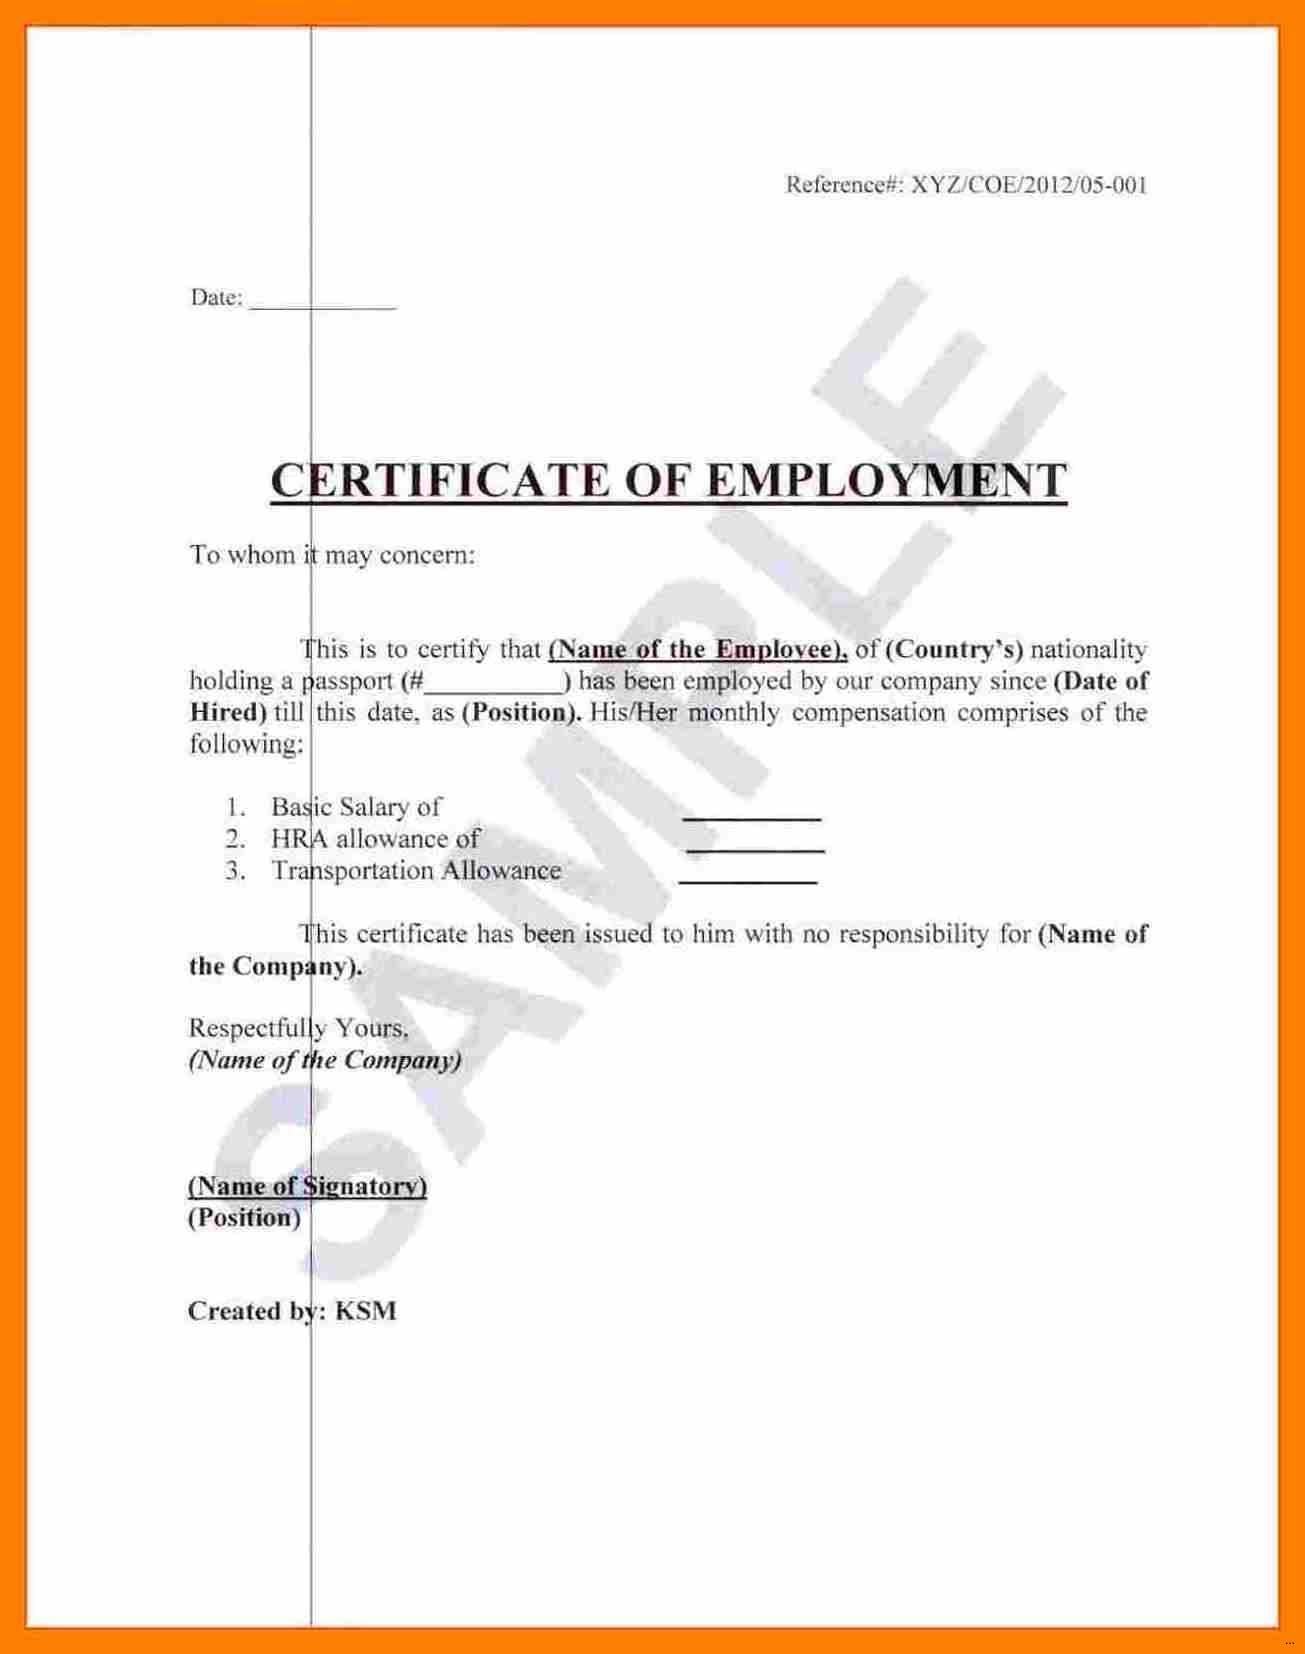 ❤ Free Printable Certificate of Employment Form Sample Template❤ Inside Certificate Of Employment Template